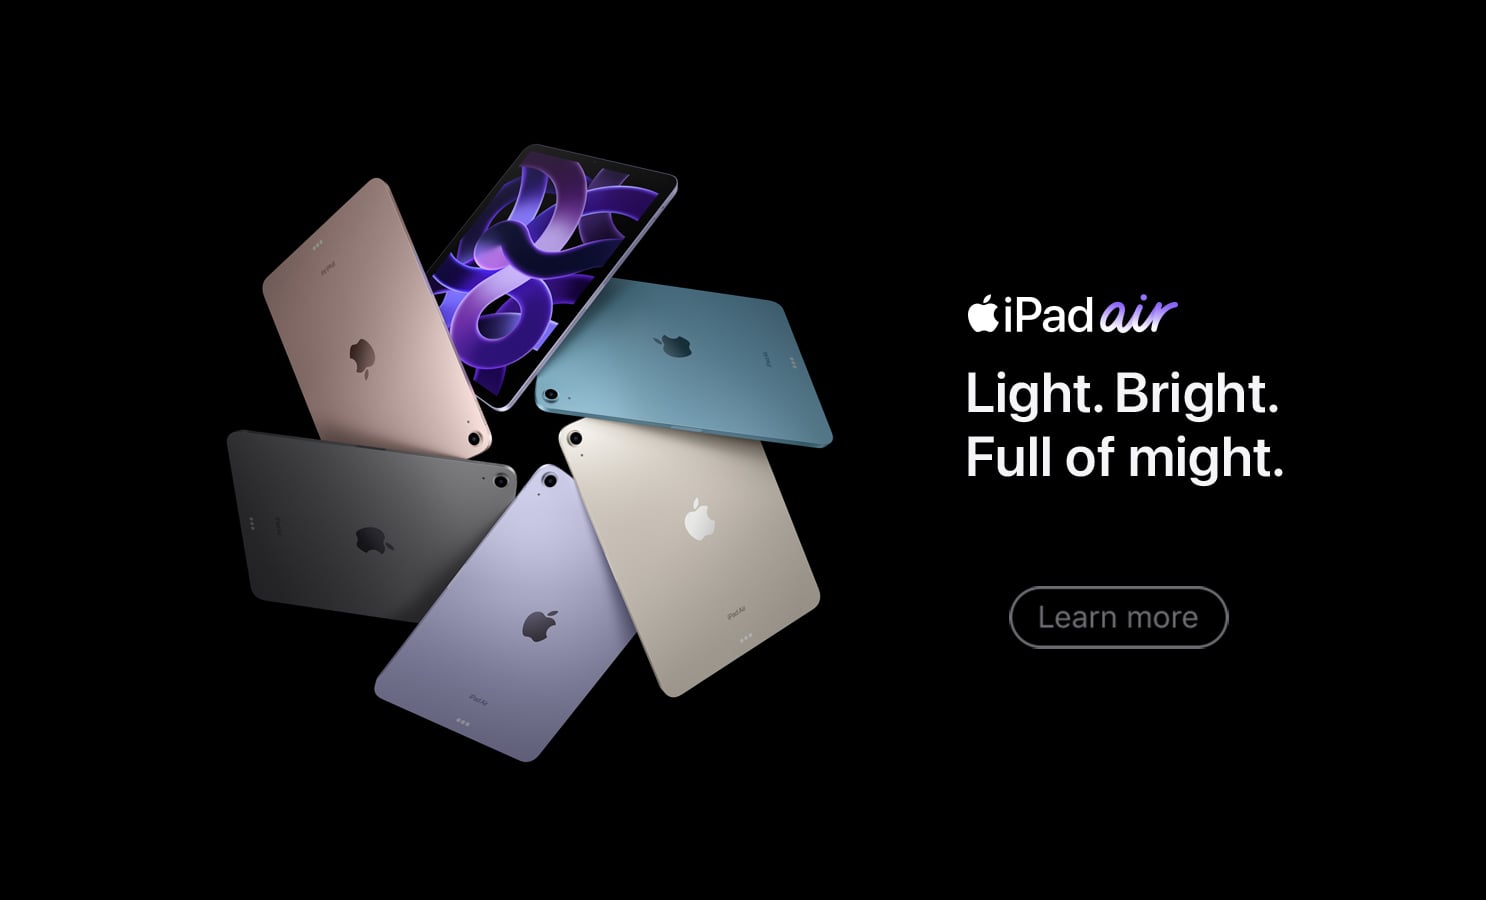 Apple iPad Air now available at Strata Networks.